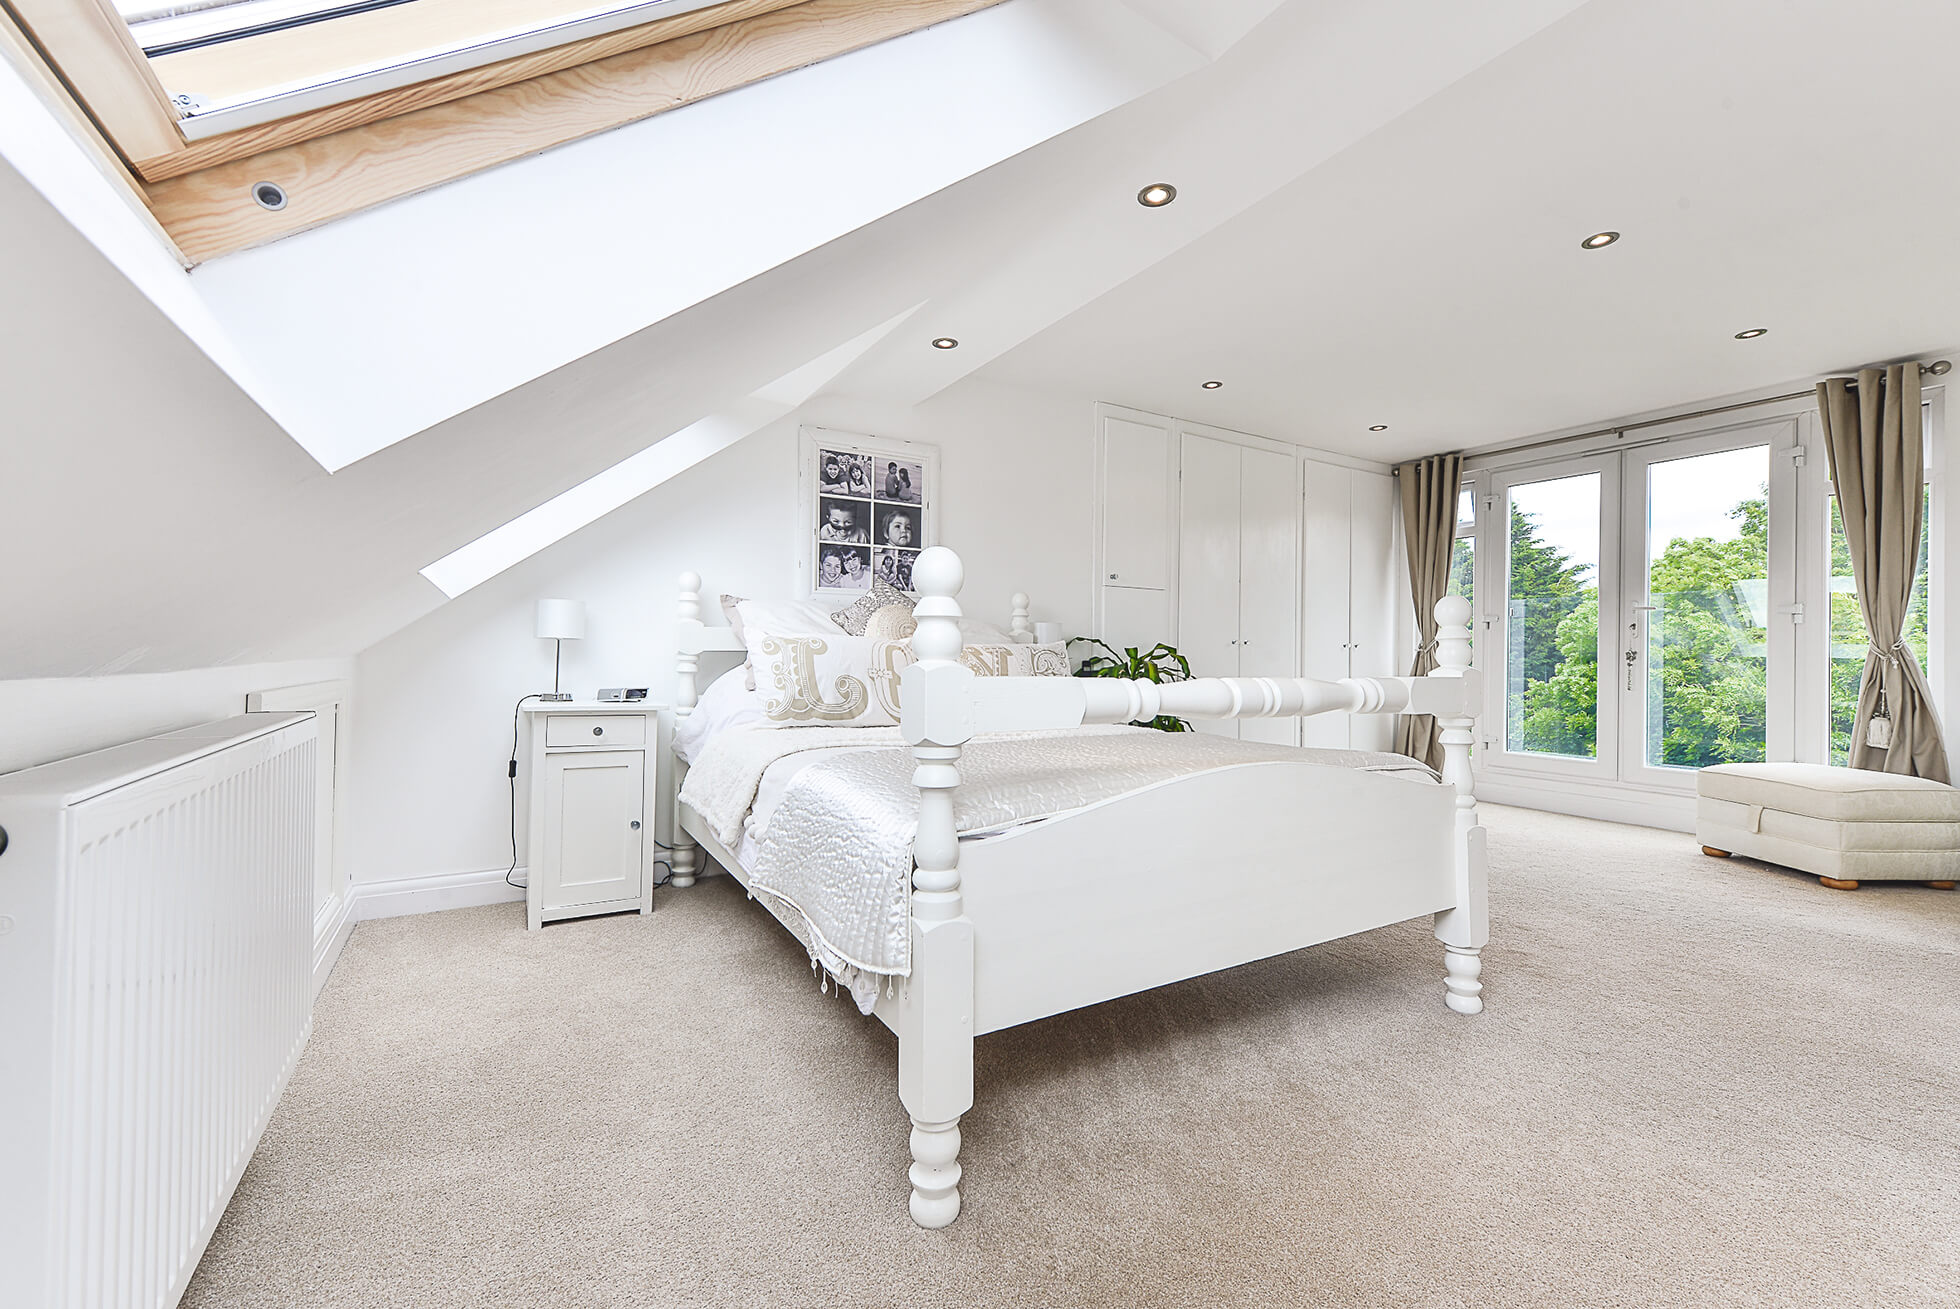 Do you have a question about converting your Loft in Apsley? Here are the most popular questions asked by our clients.